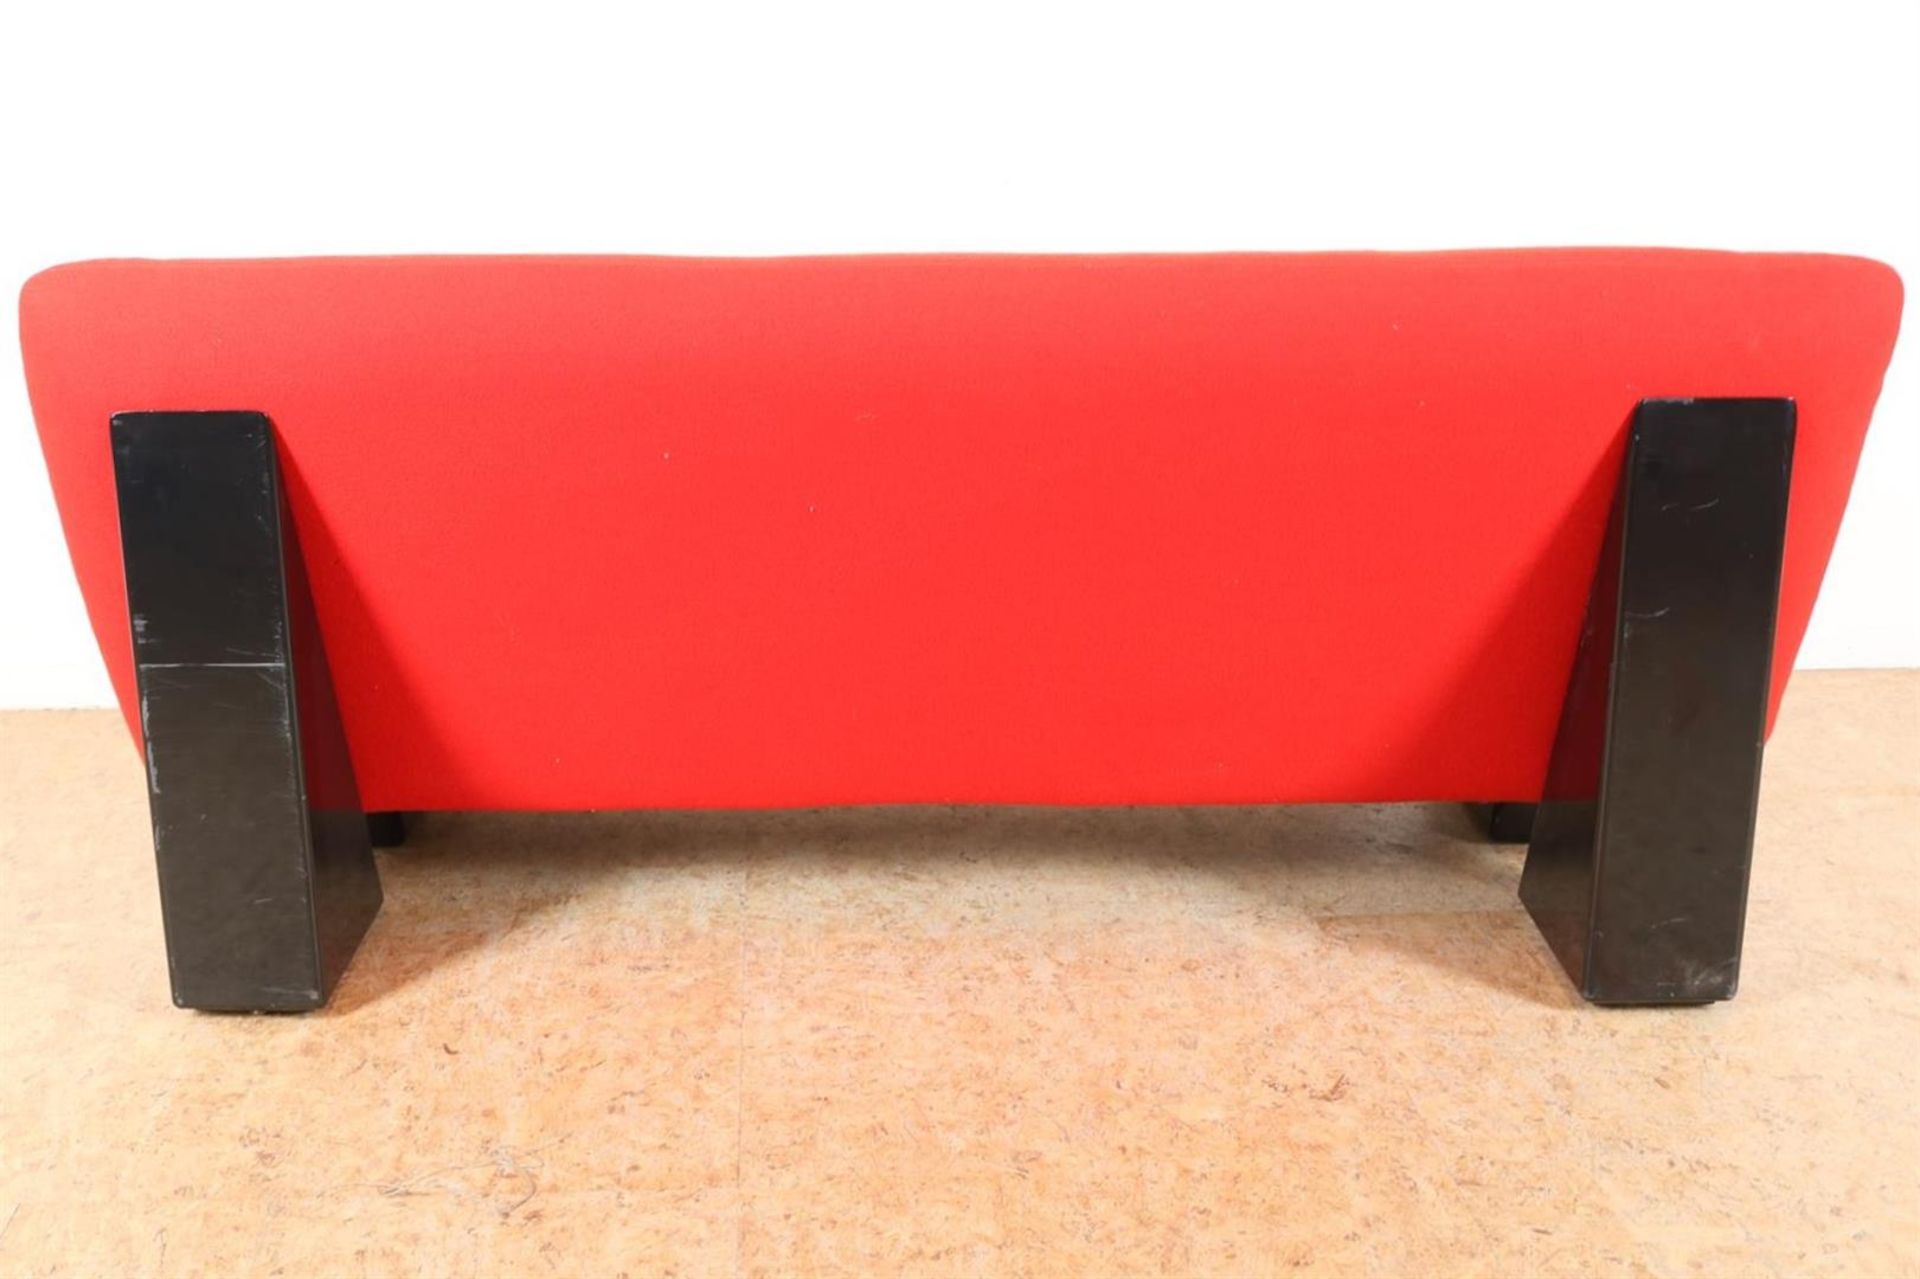 Two-seater sofa with red fabric upholstery and black wooden base, model “Sandwich” (model 750), - Image 4 of 4